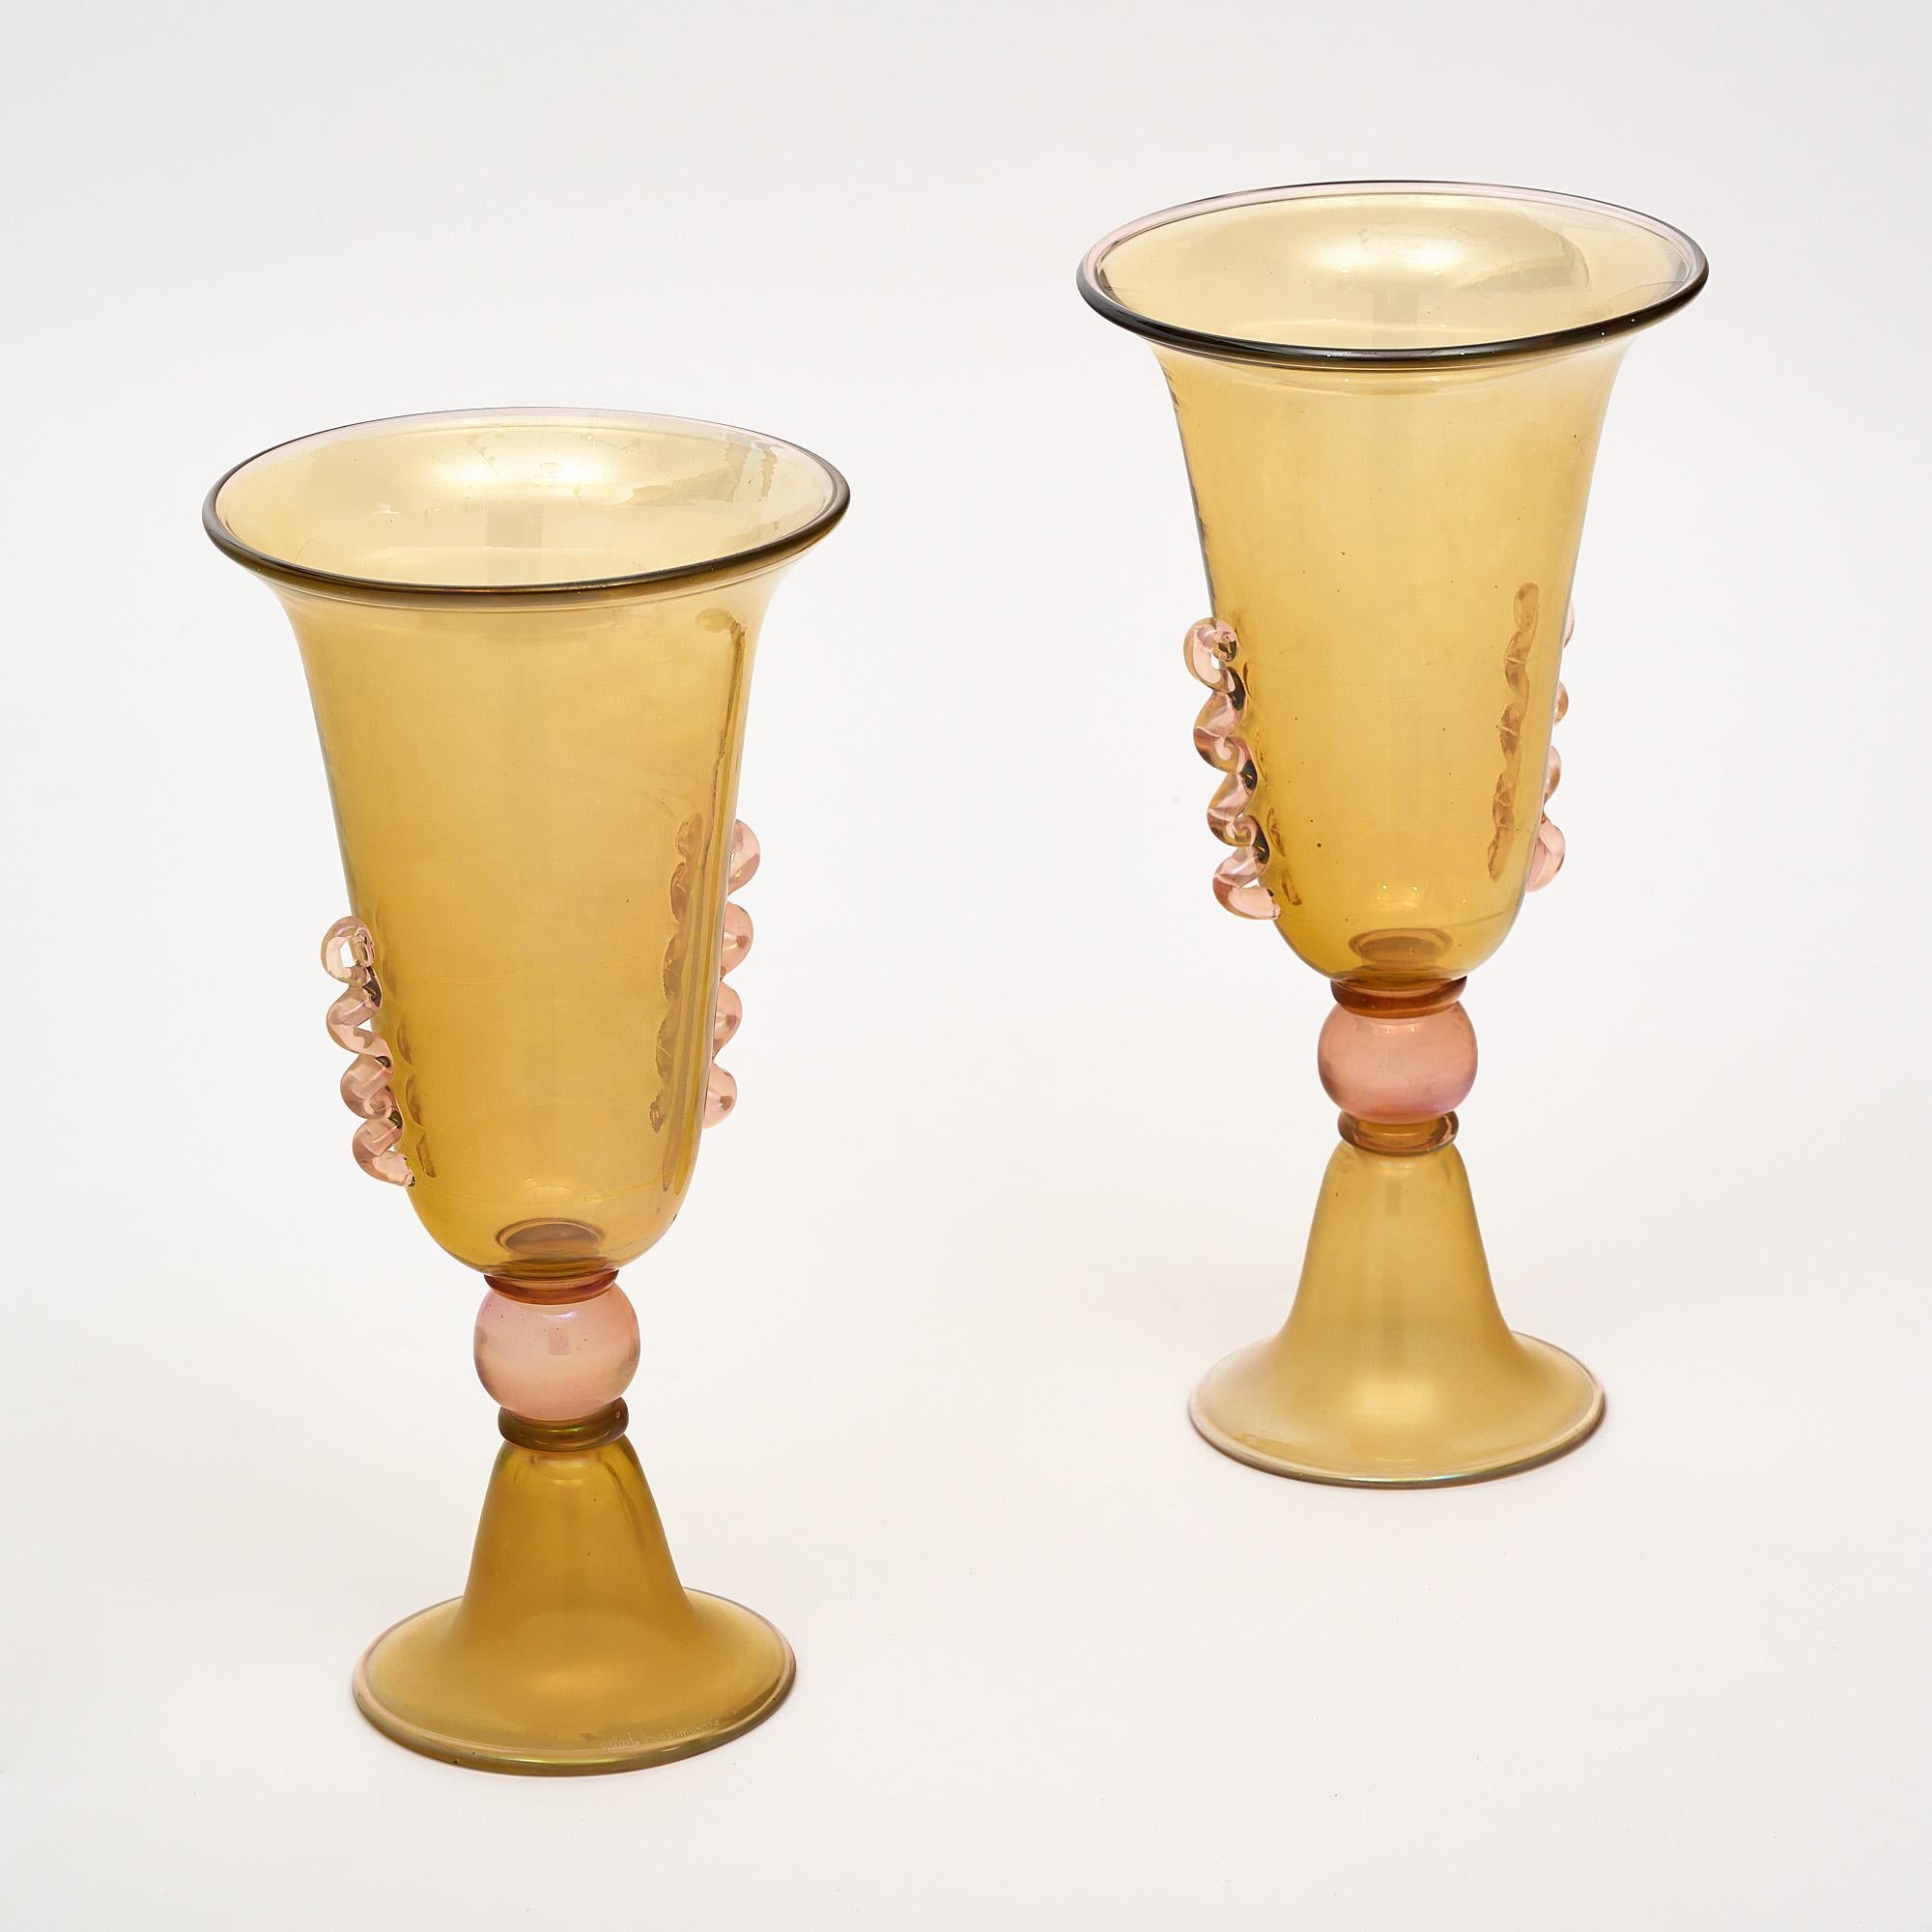 A pair of vases, Italian, from the island of Murano by Alberto Dona. This pair features classic techniques and combines pink and amber glass with a lovely iridescent hue. They are signed.